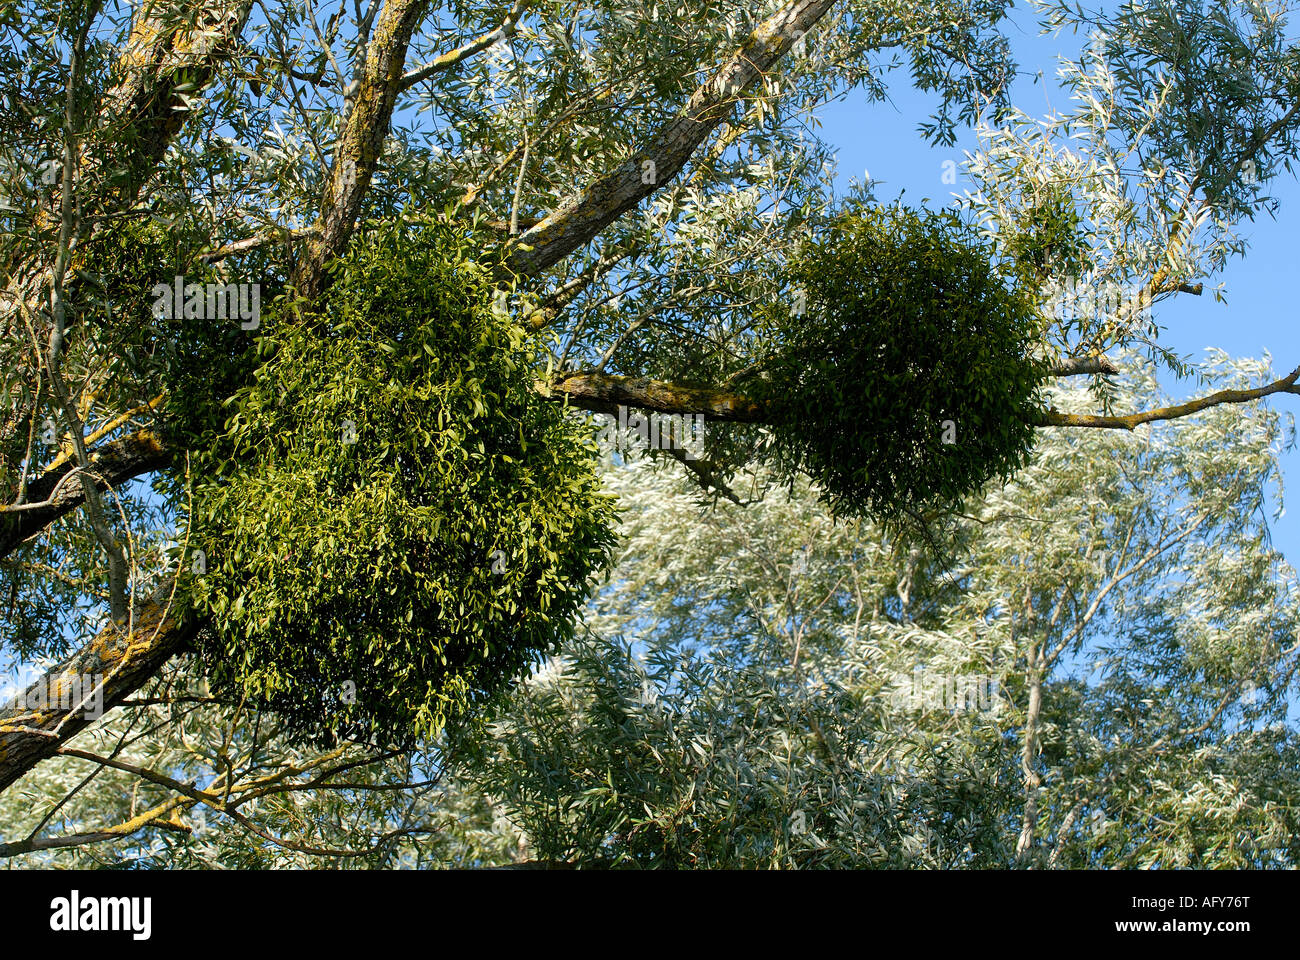 growing on White Willow, La Brenne, France. Stock Photo